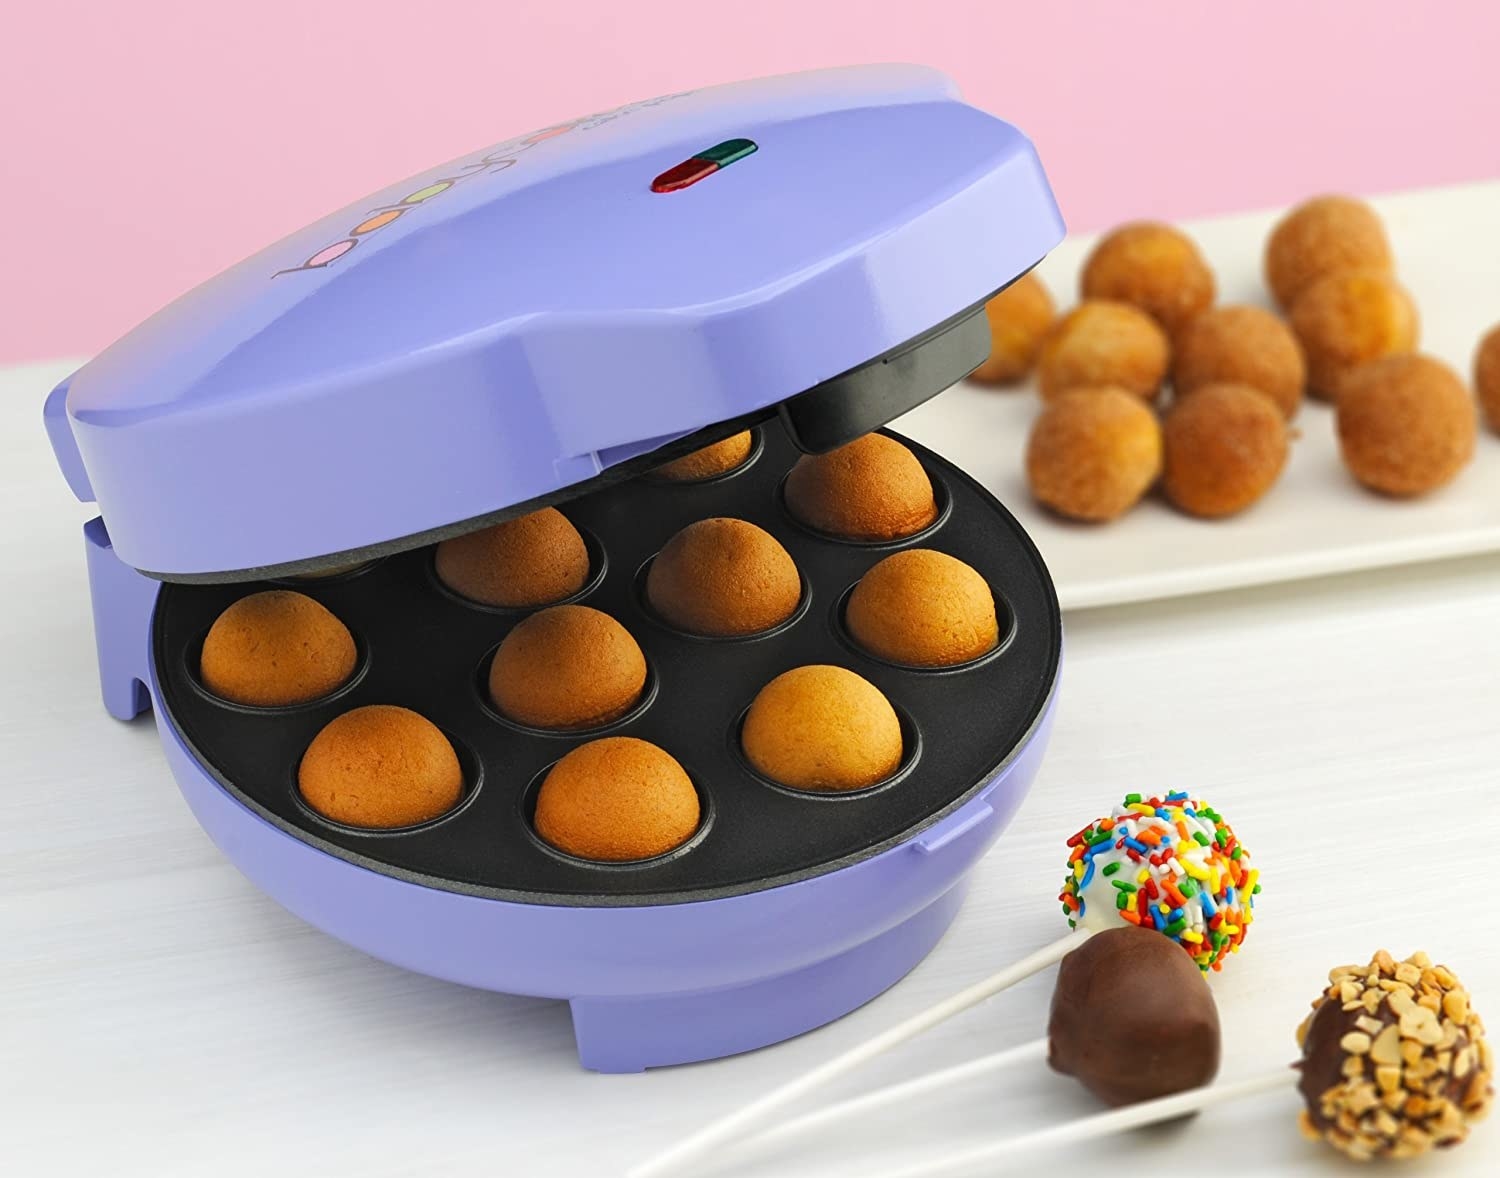 the cake pop maker beside cake pops and filled with cake pops